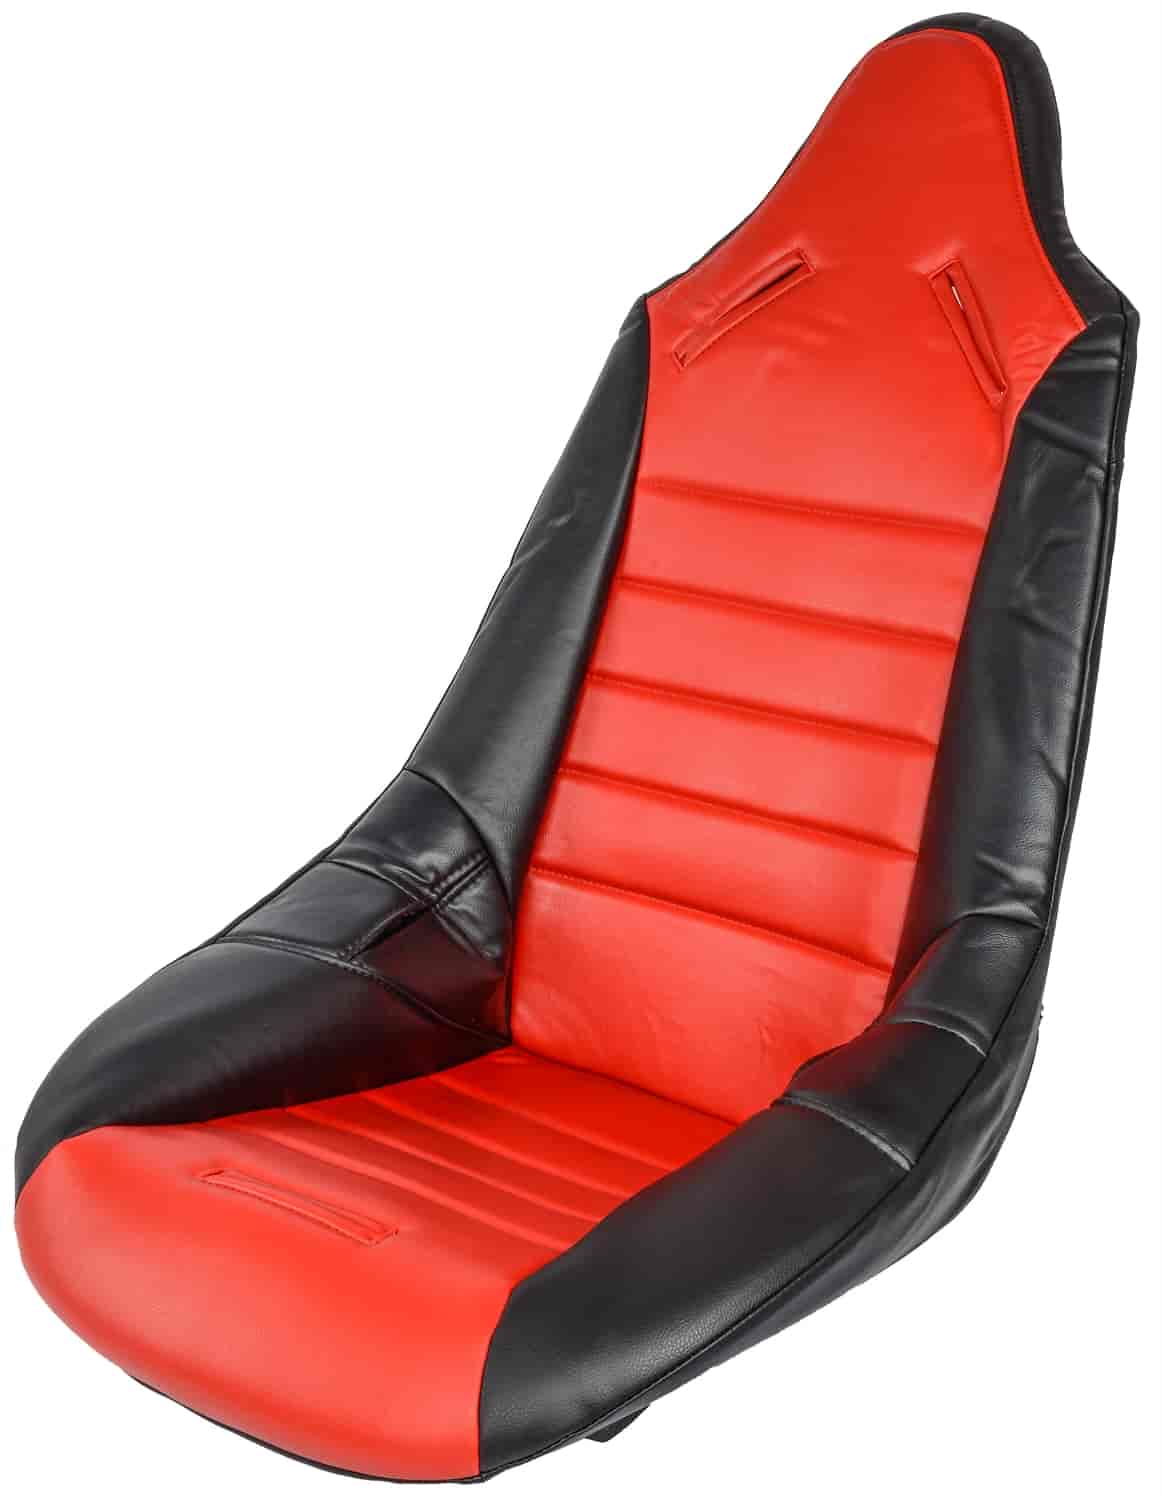 Pro High Back II Vinyl Seat Cover Red with Black Trim